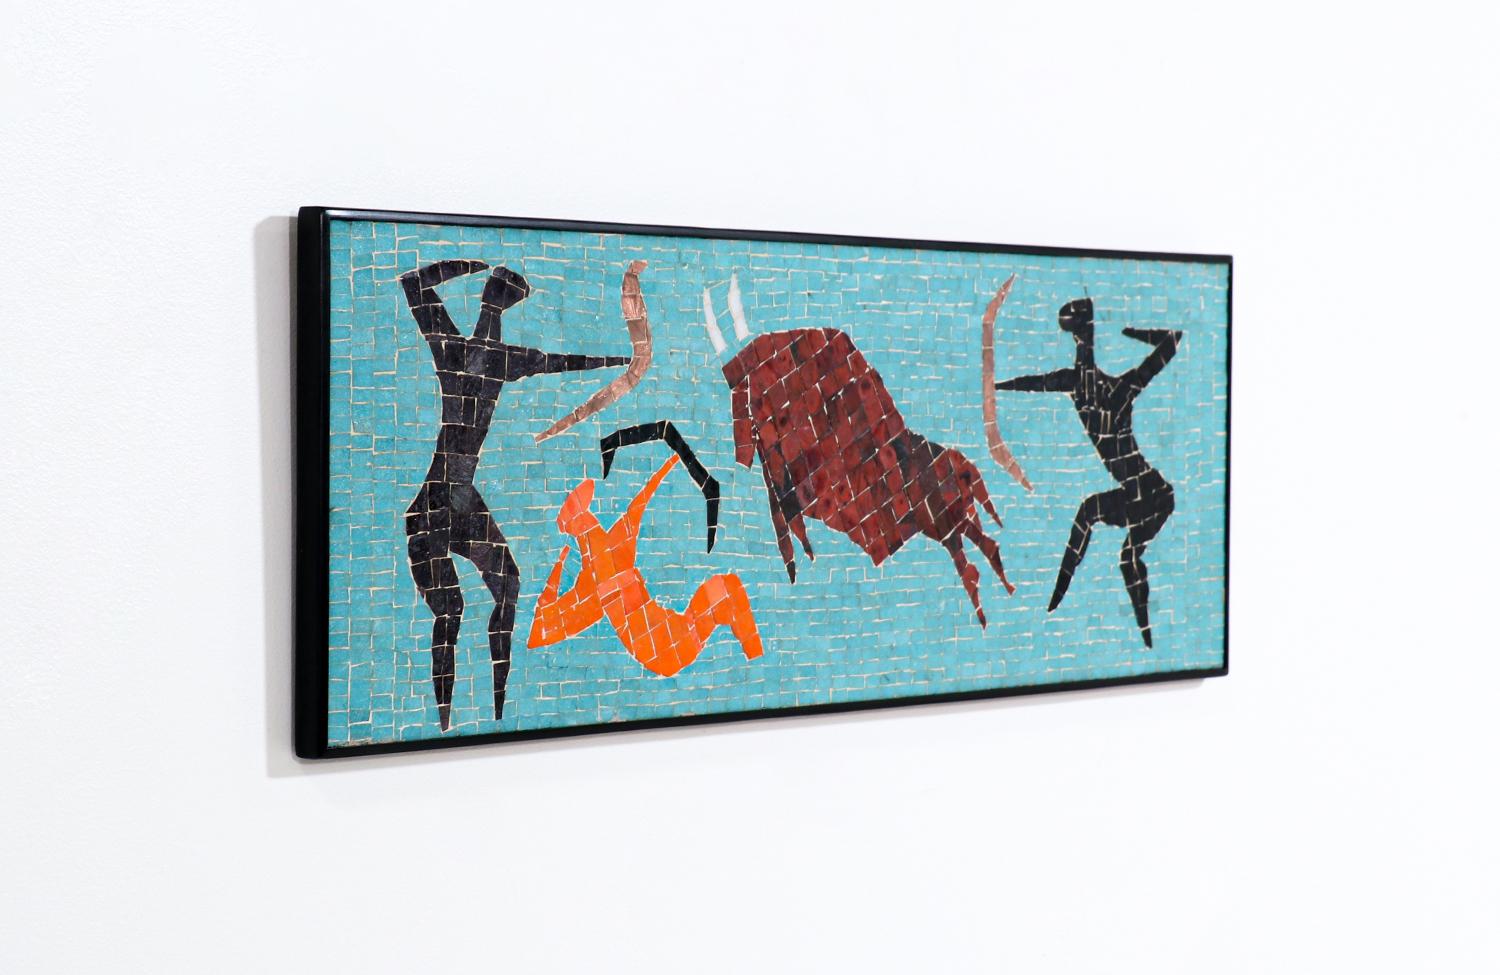 Mid-Century Modern Mosaic Tile of Bull Wall Plaque 1